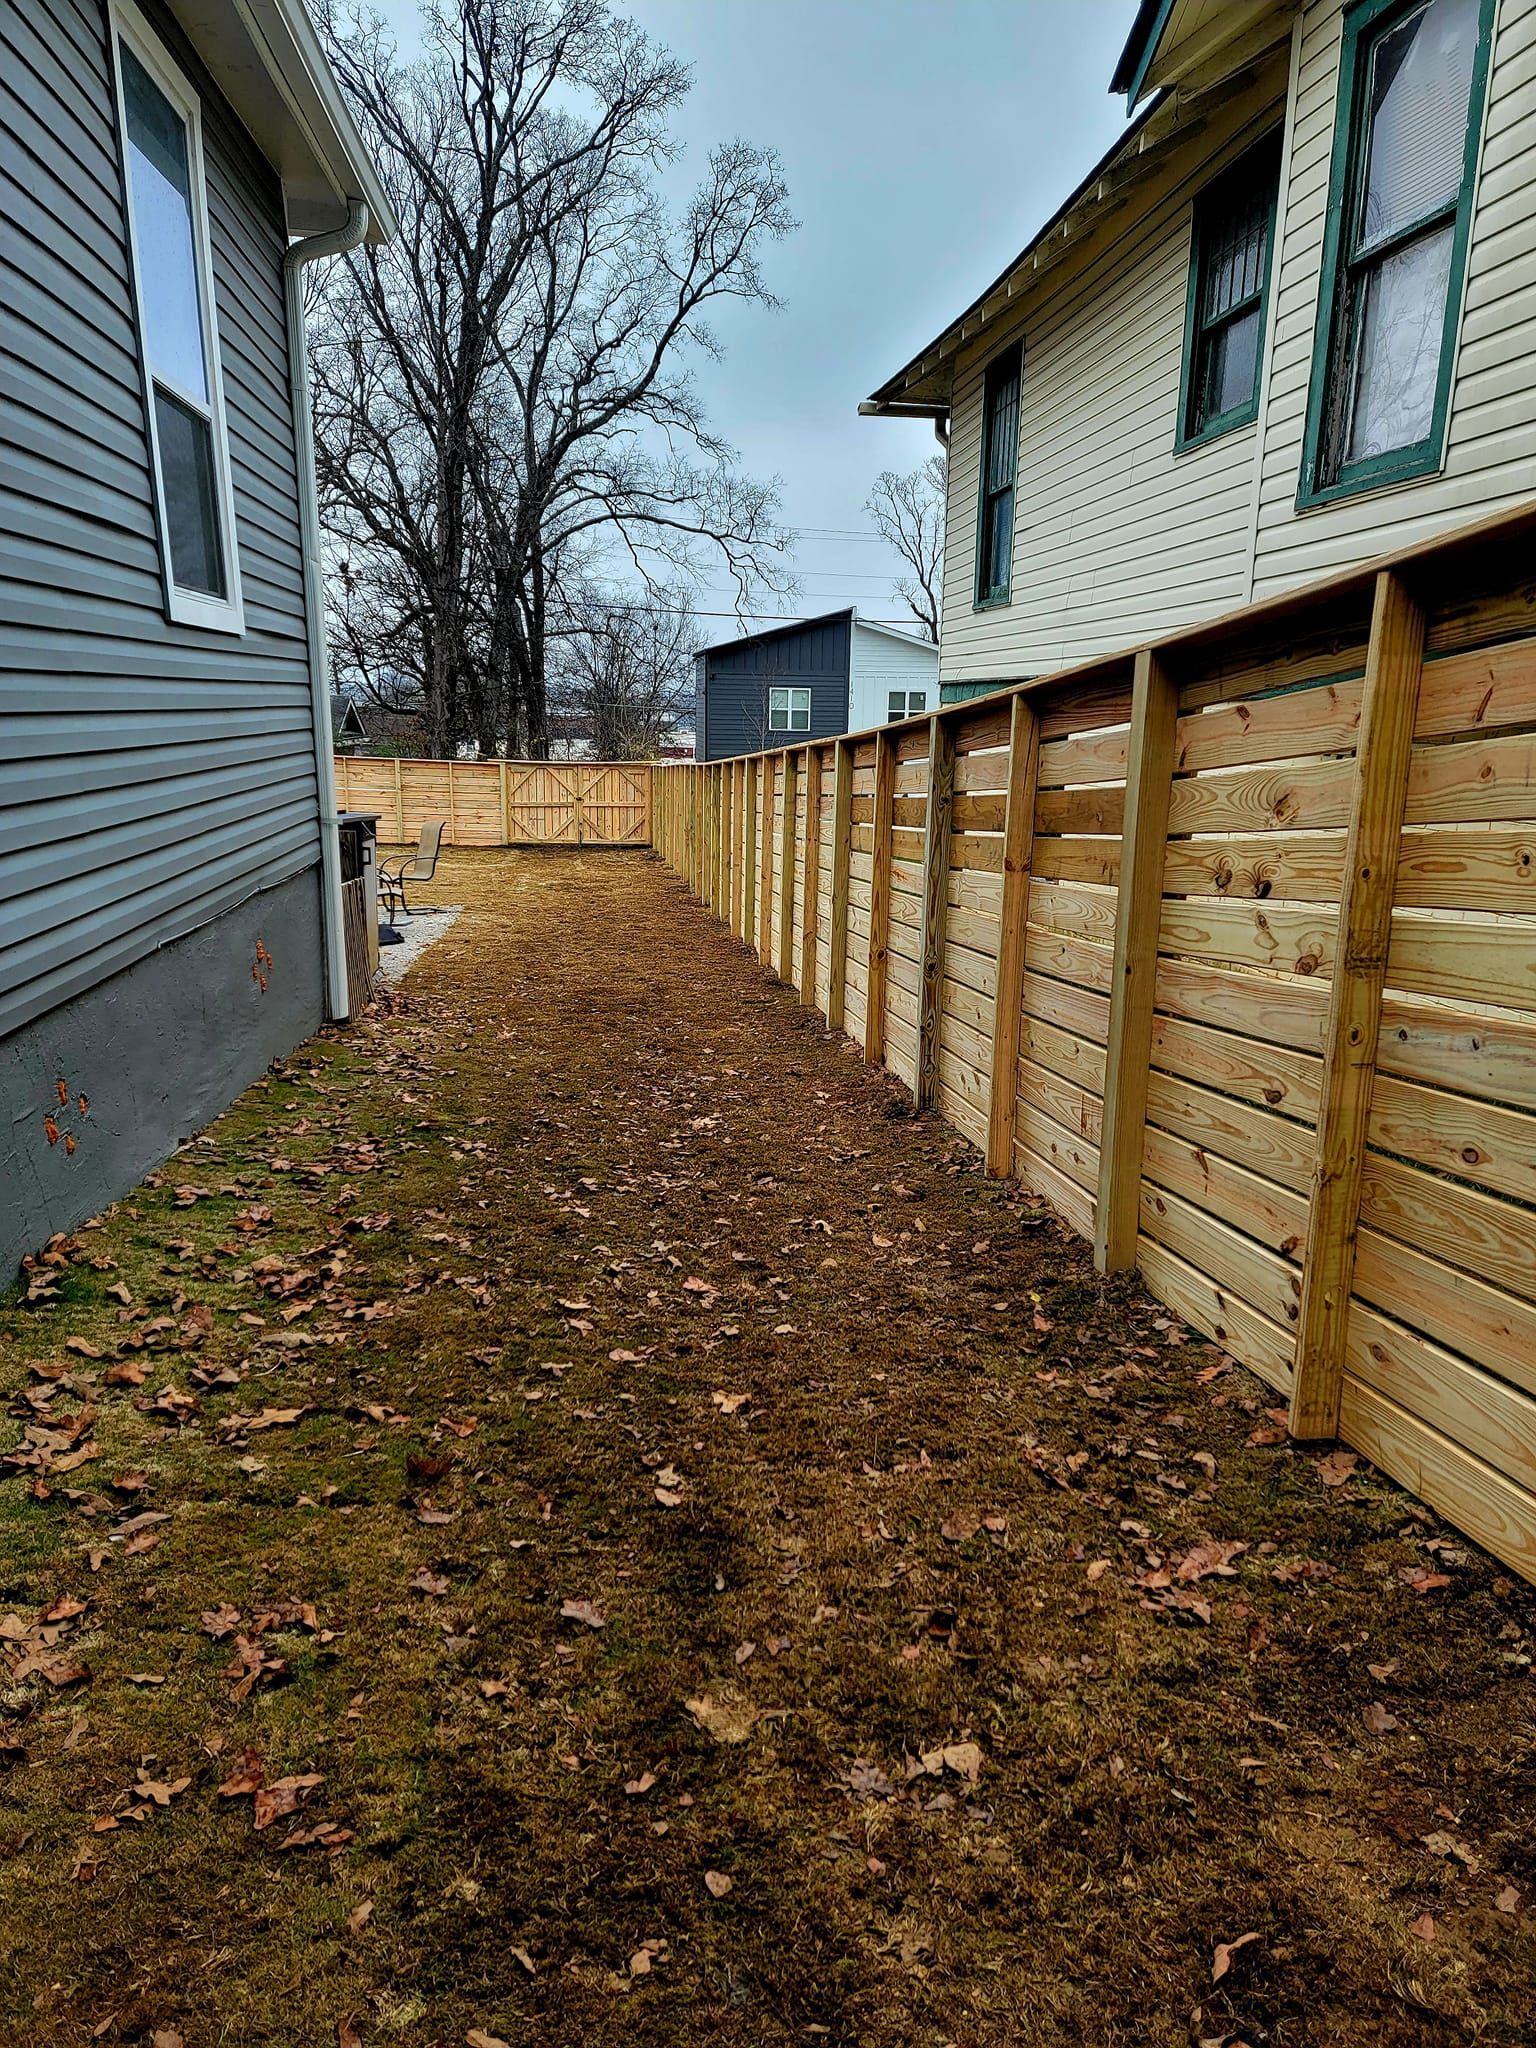 there is a wooden fence between two houses .